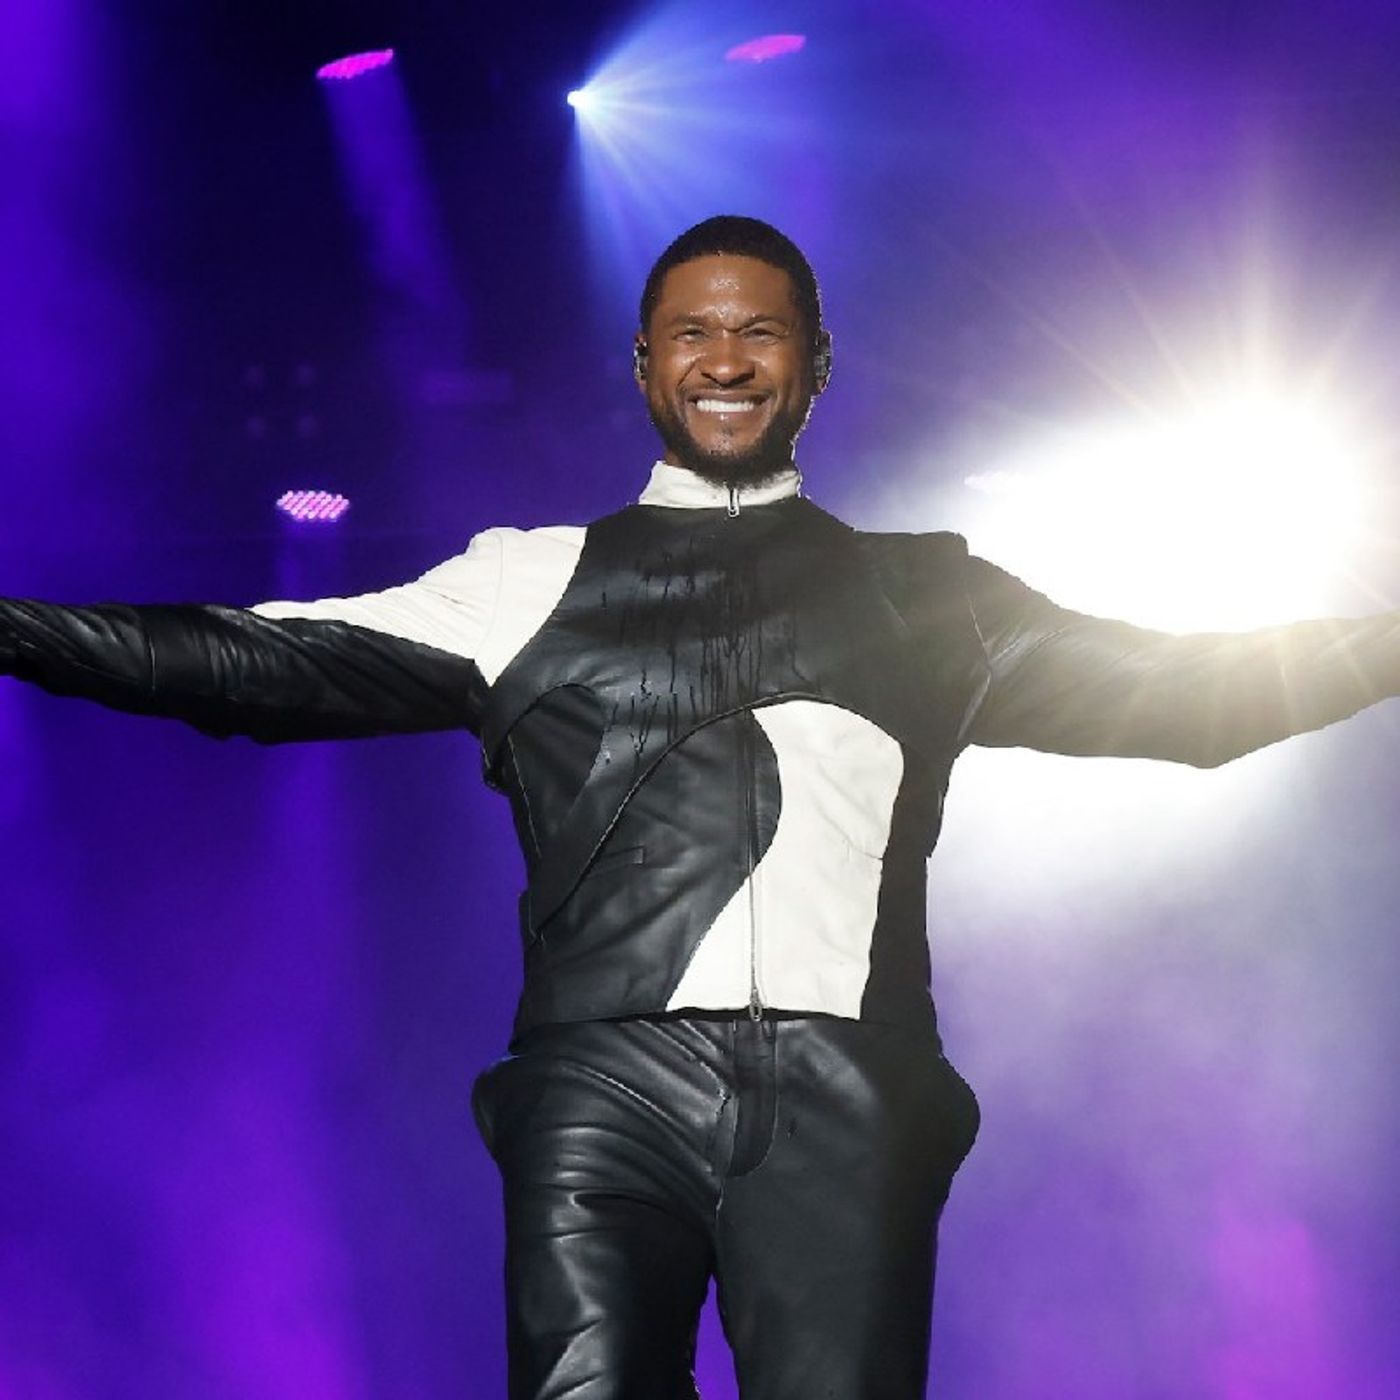 Episode 49 - Usher Gets The Super Bowl Headline Show And Brain Flores Gets A Lawsuit